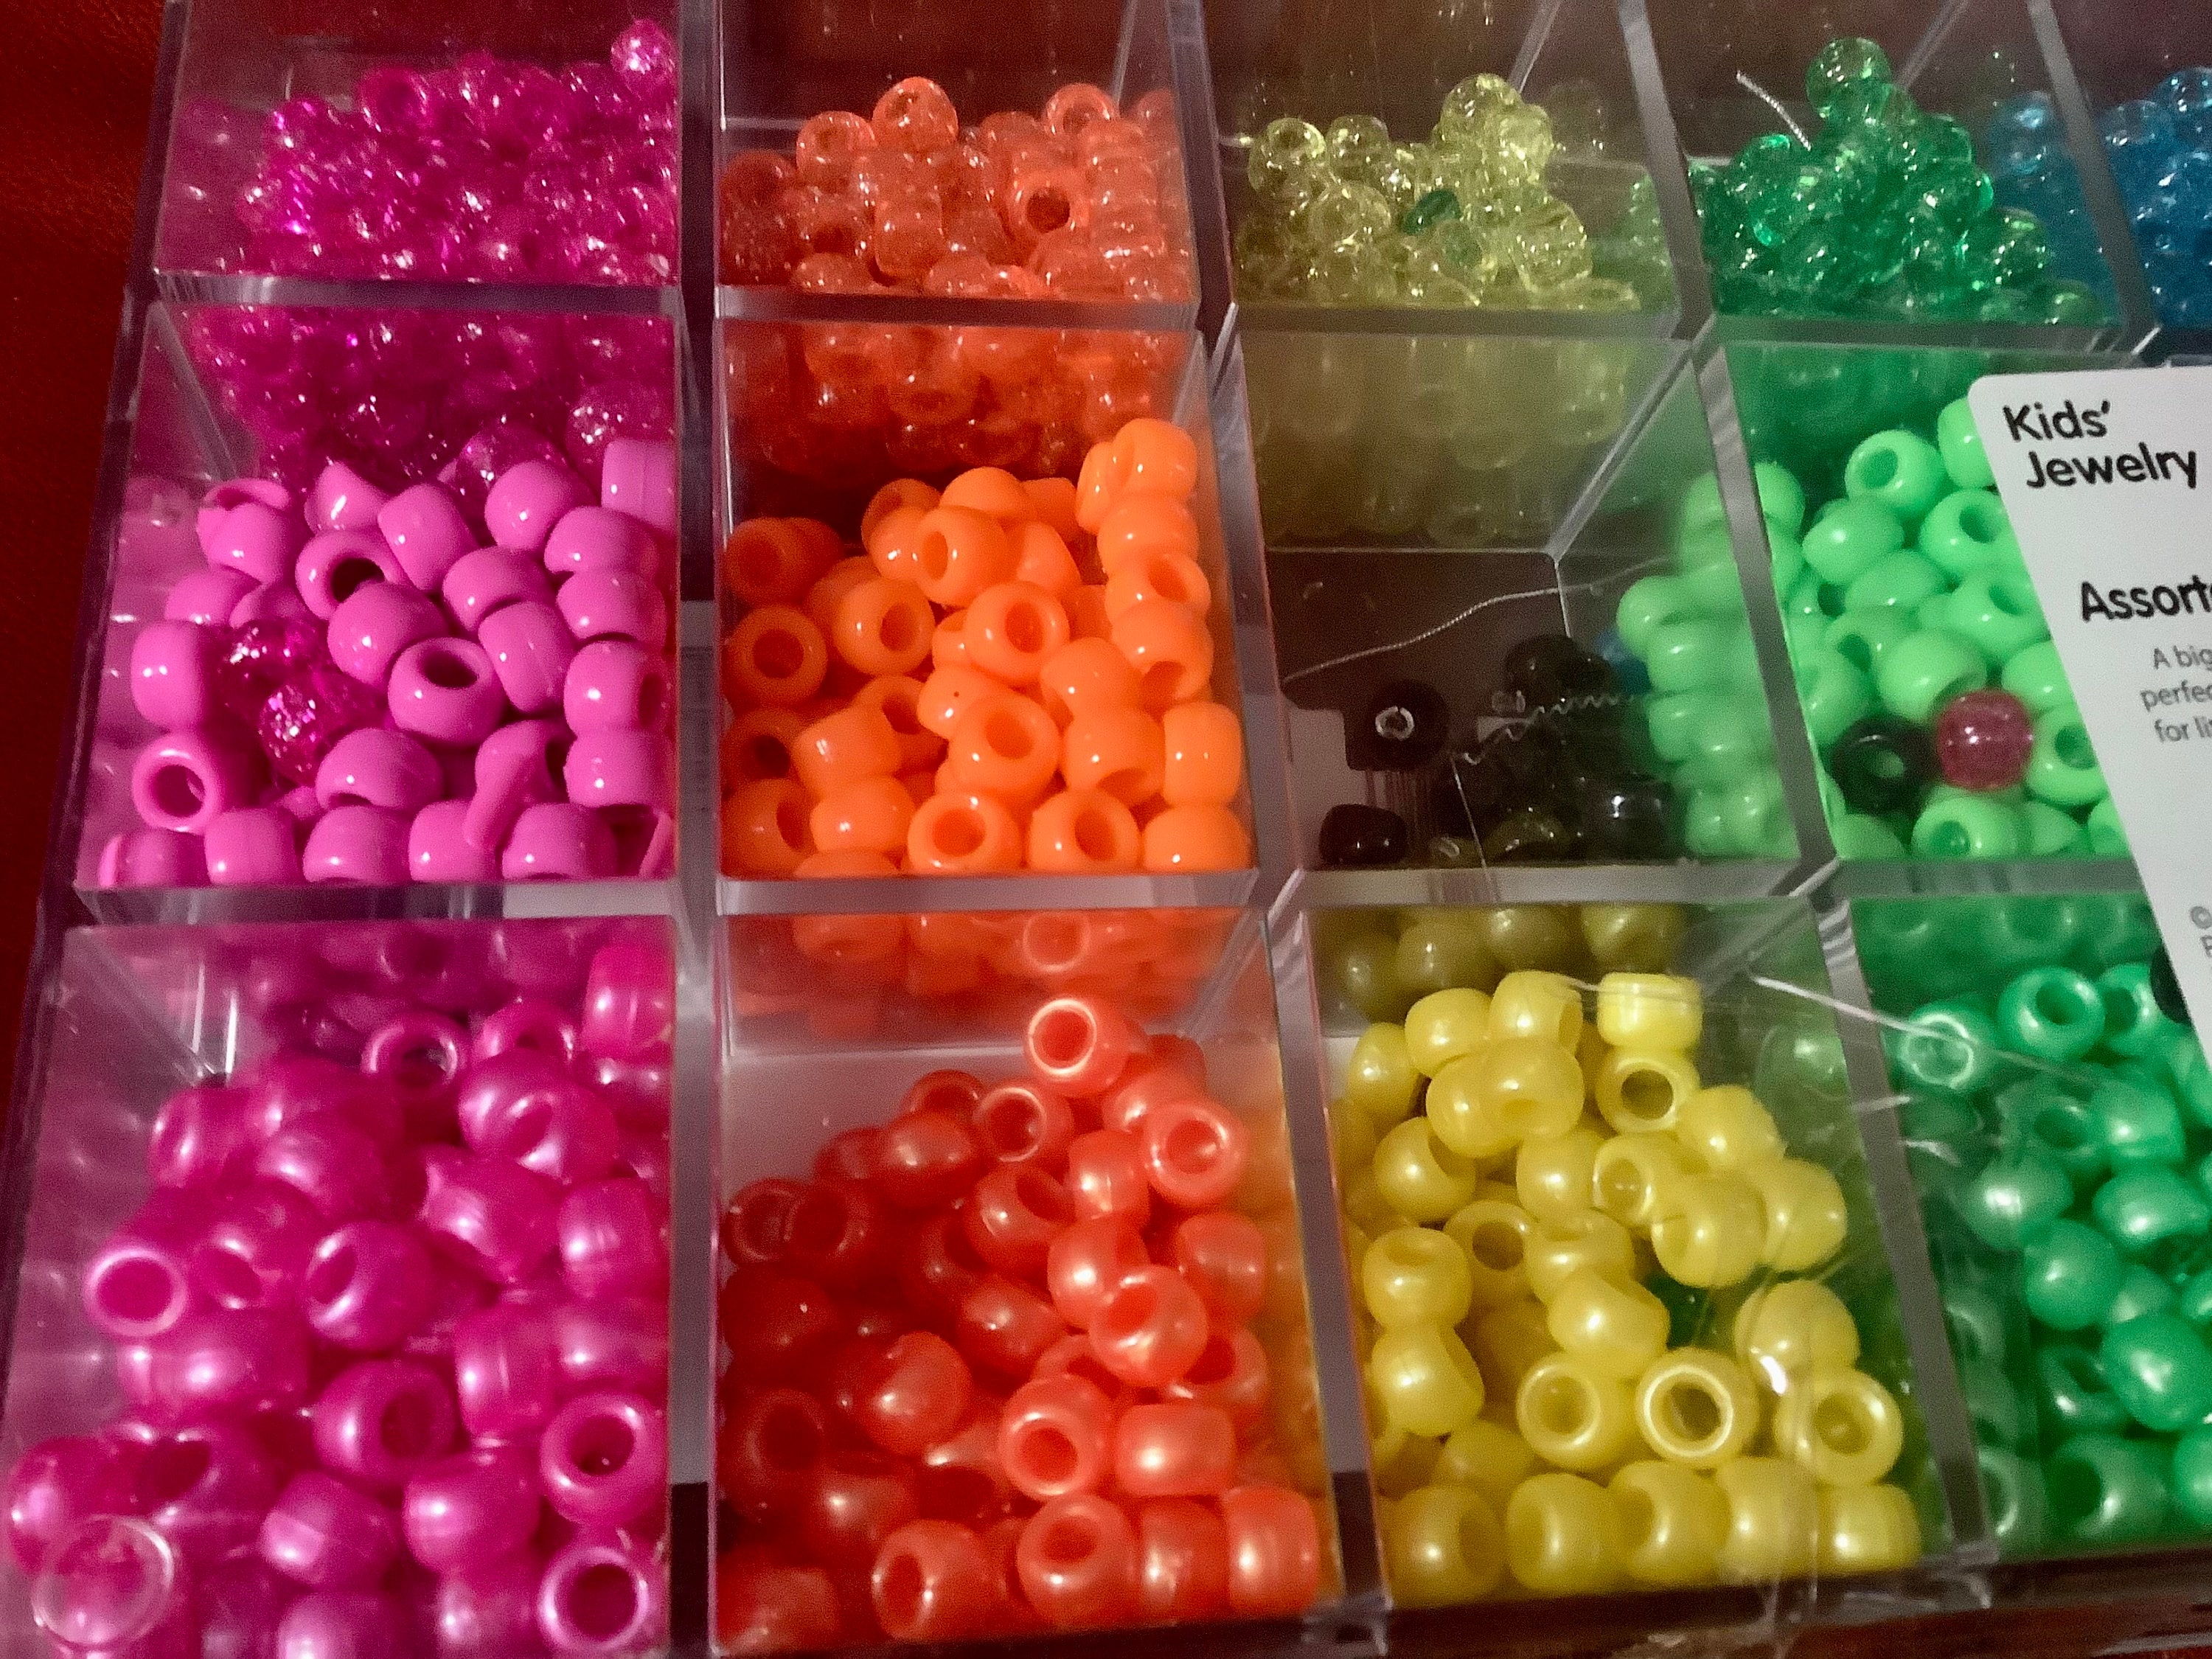 Buy Pony Bead Mix, Bright Colors at S&S Worldwide